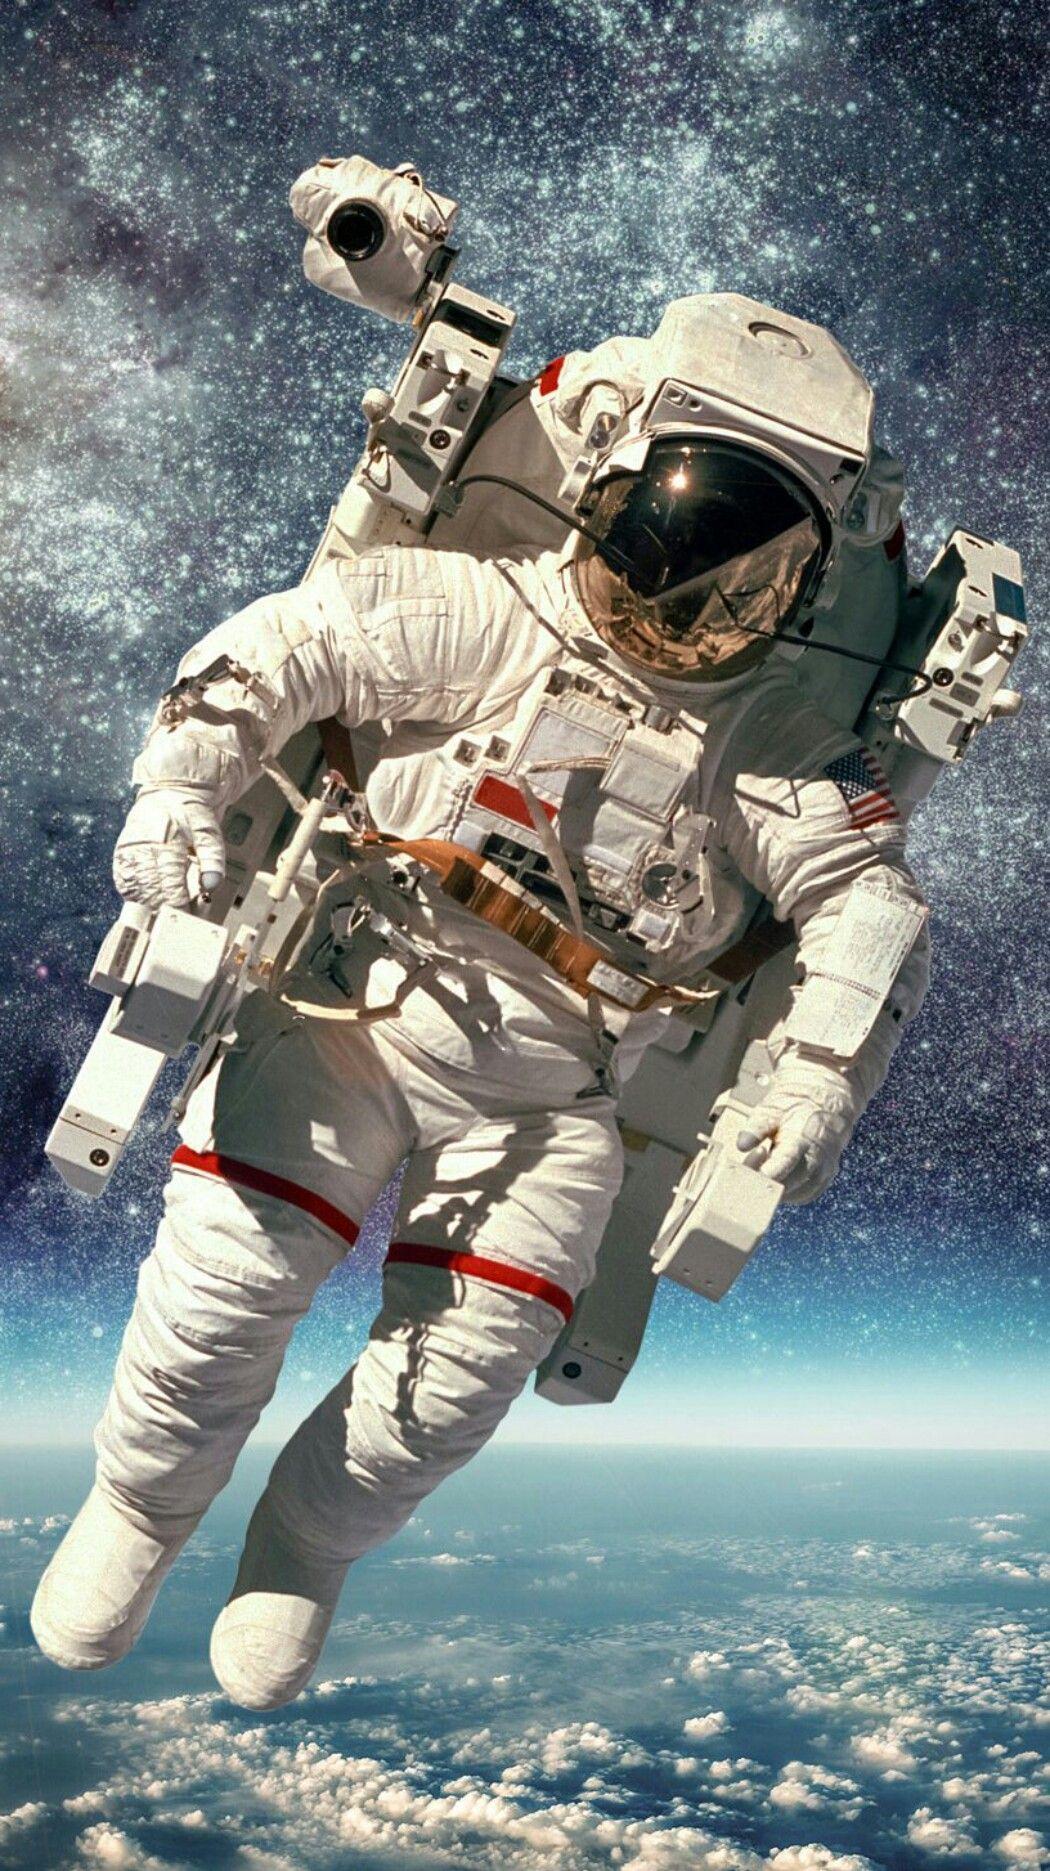 Spaceman. Space, astronomy, Space planets, Astronaut wallpaper